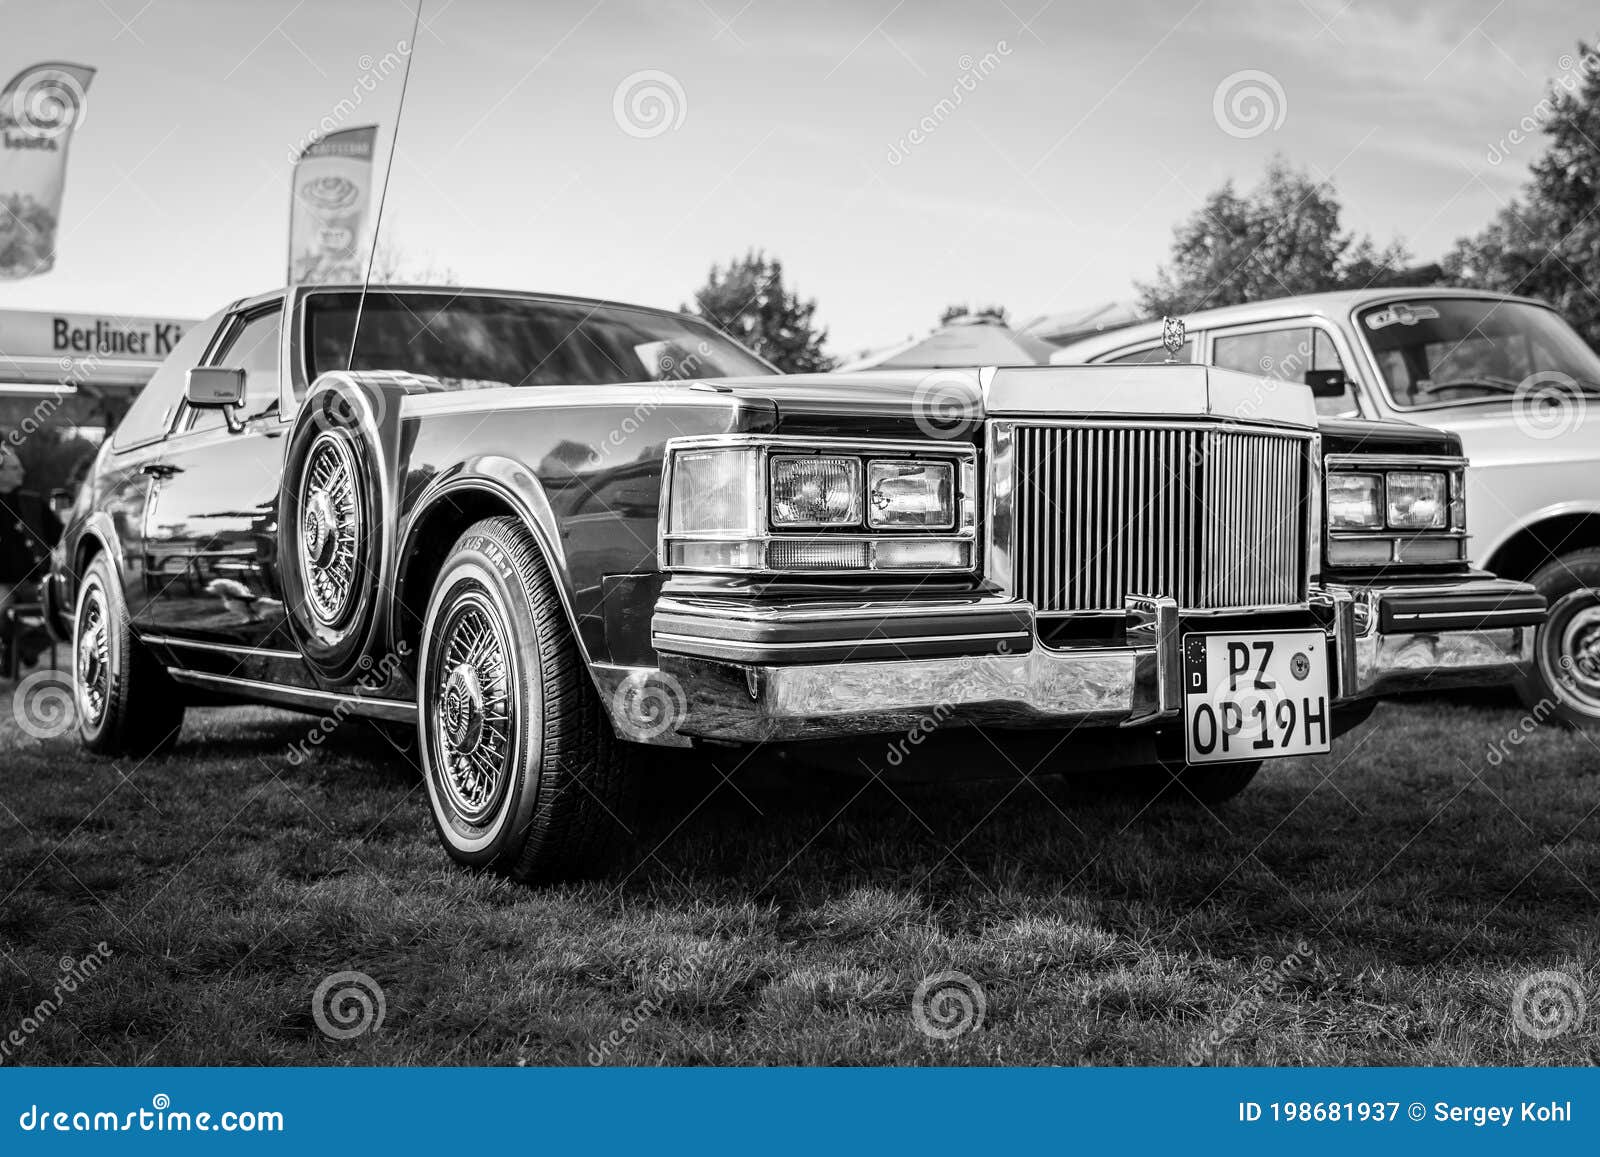 Cadillac Seville Photos Free Royalty Free Stock Photos From Dreamstime